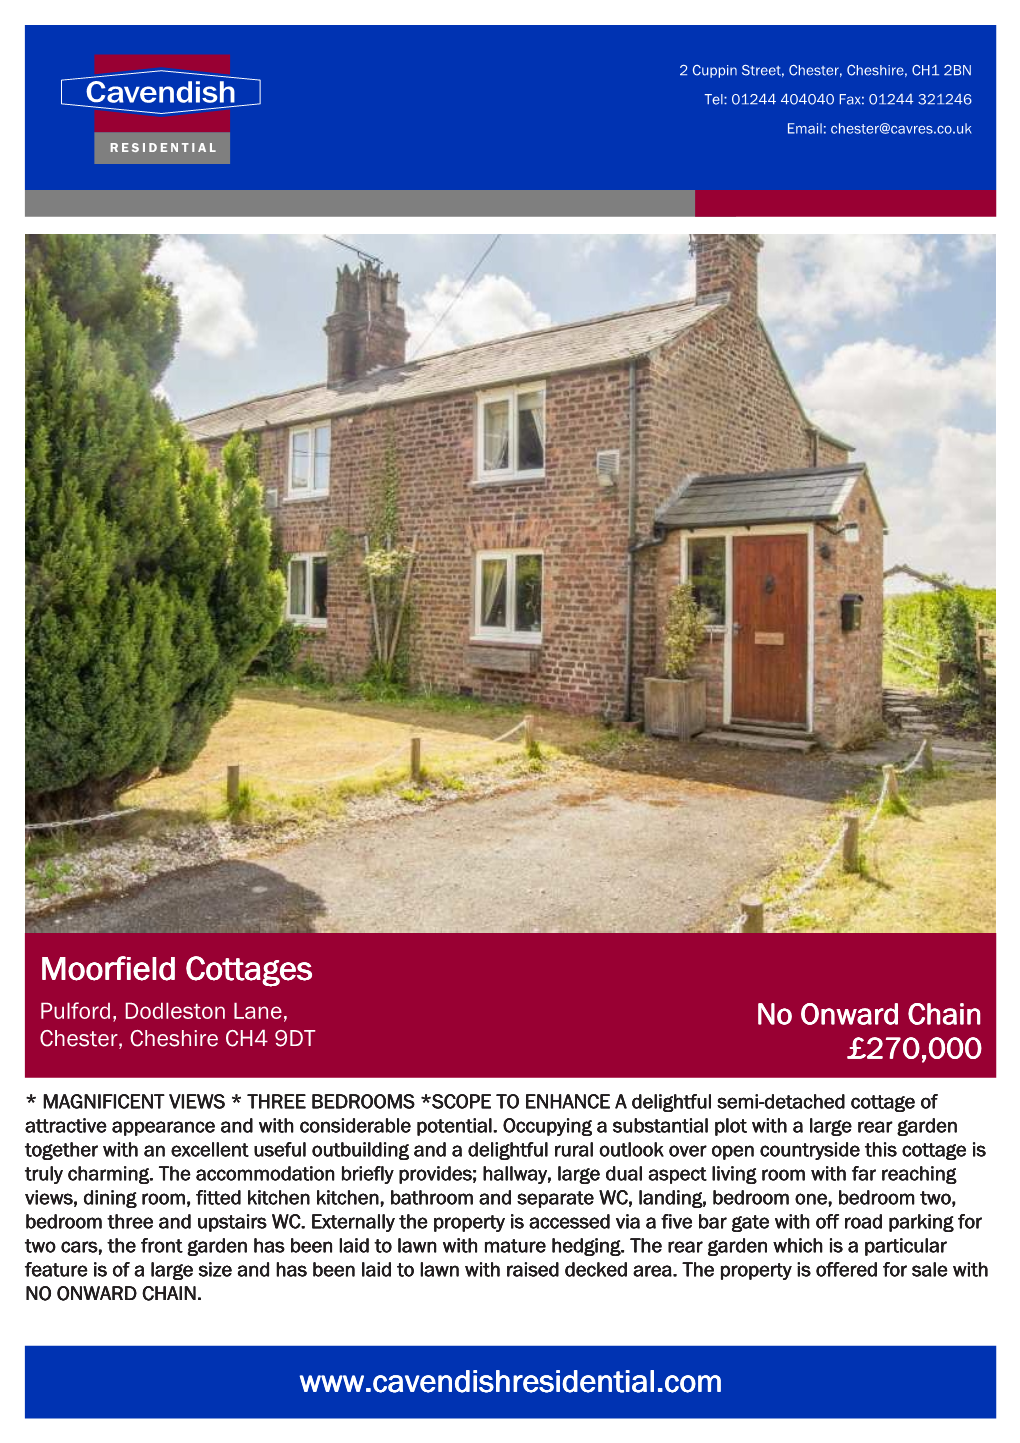 Moorfield Cottages Pulford, Dodleston Lane, No Onward Chain Chester, Cheshire CH4 9DT £270,000